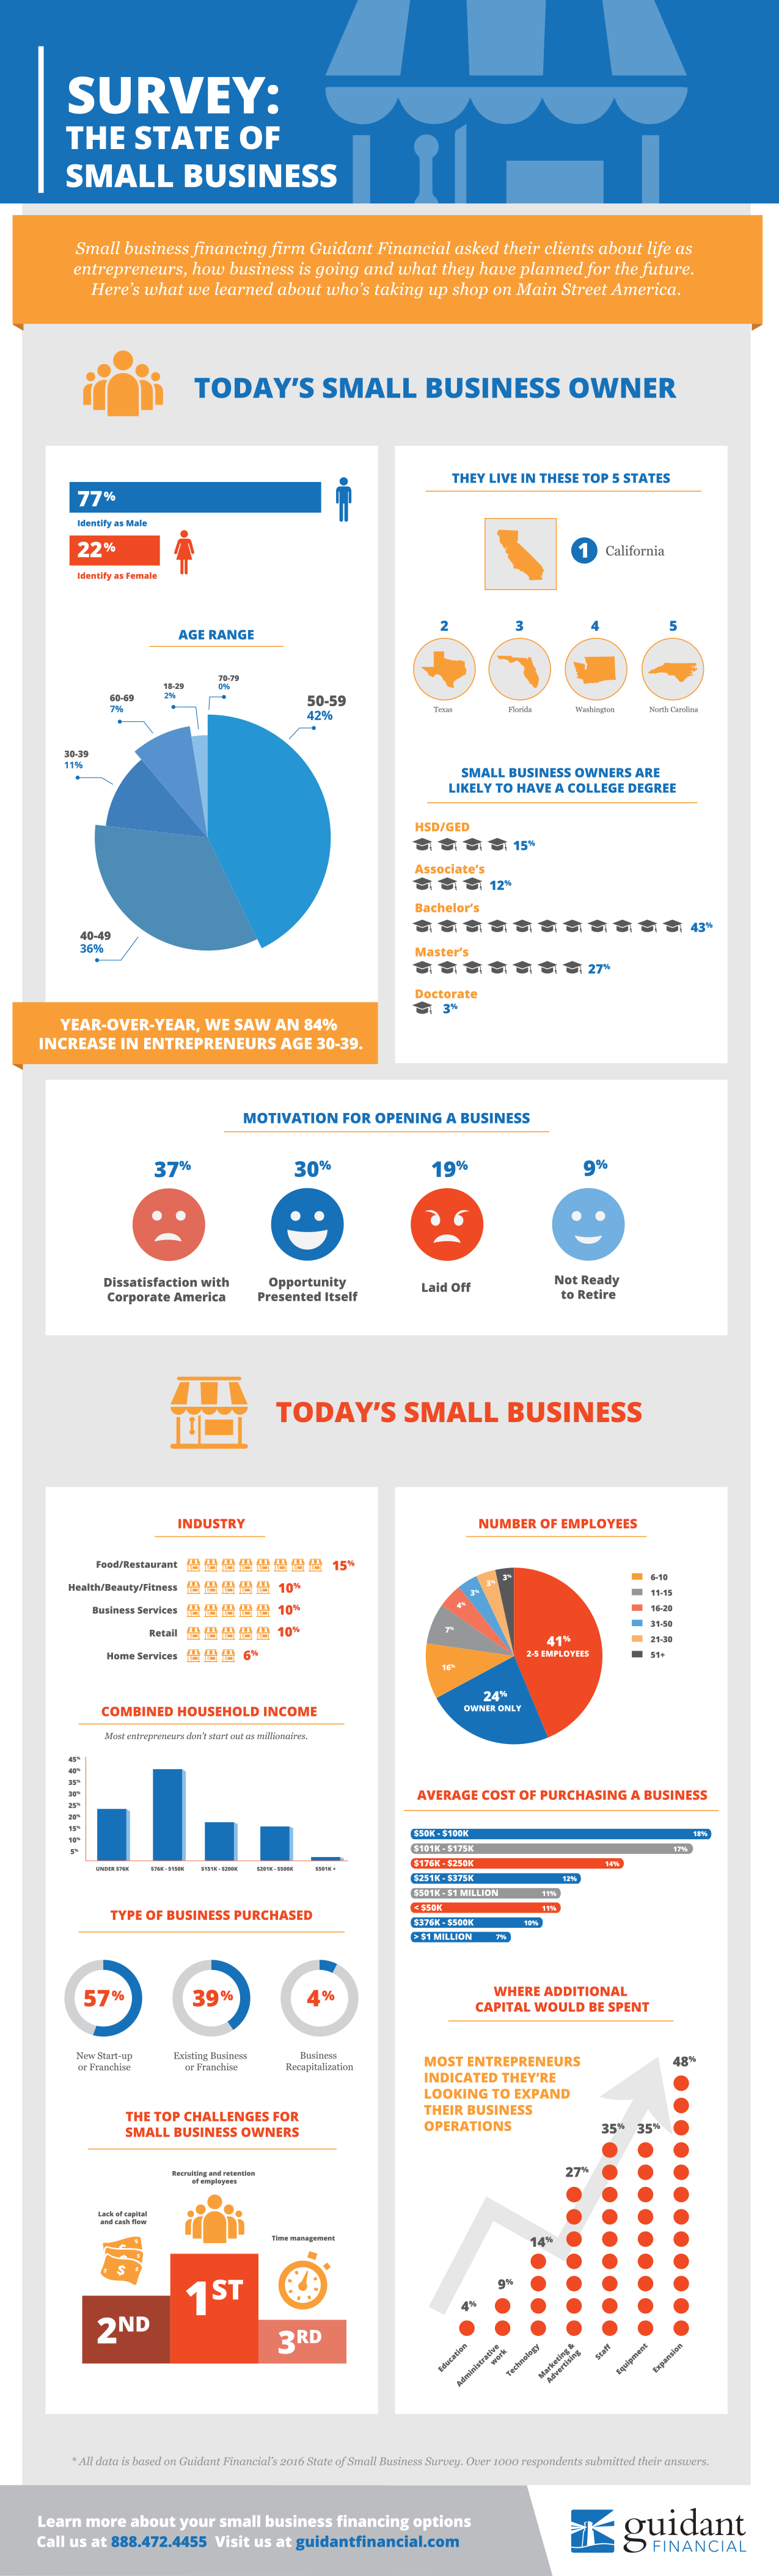 2014 Small Business Survey [Infographic] - Visualistan